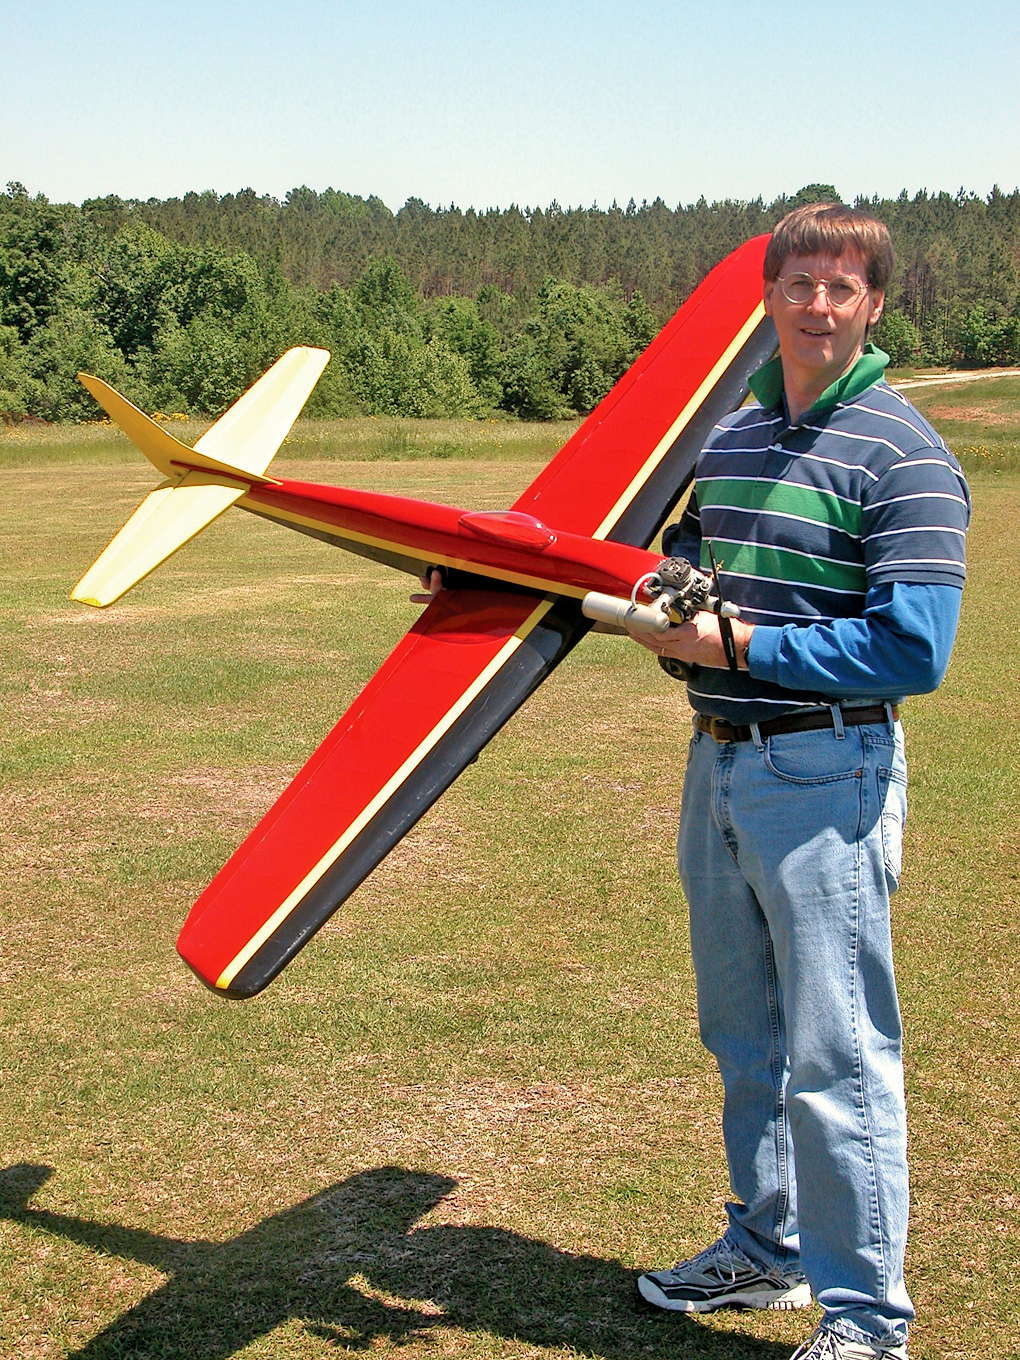 John Haffner’s award-winning version of Phil Kraft’s Kwik Fli II uses dowels and rubber bands to hold the wing on, as the original did. Duane Wilson photo.